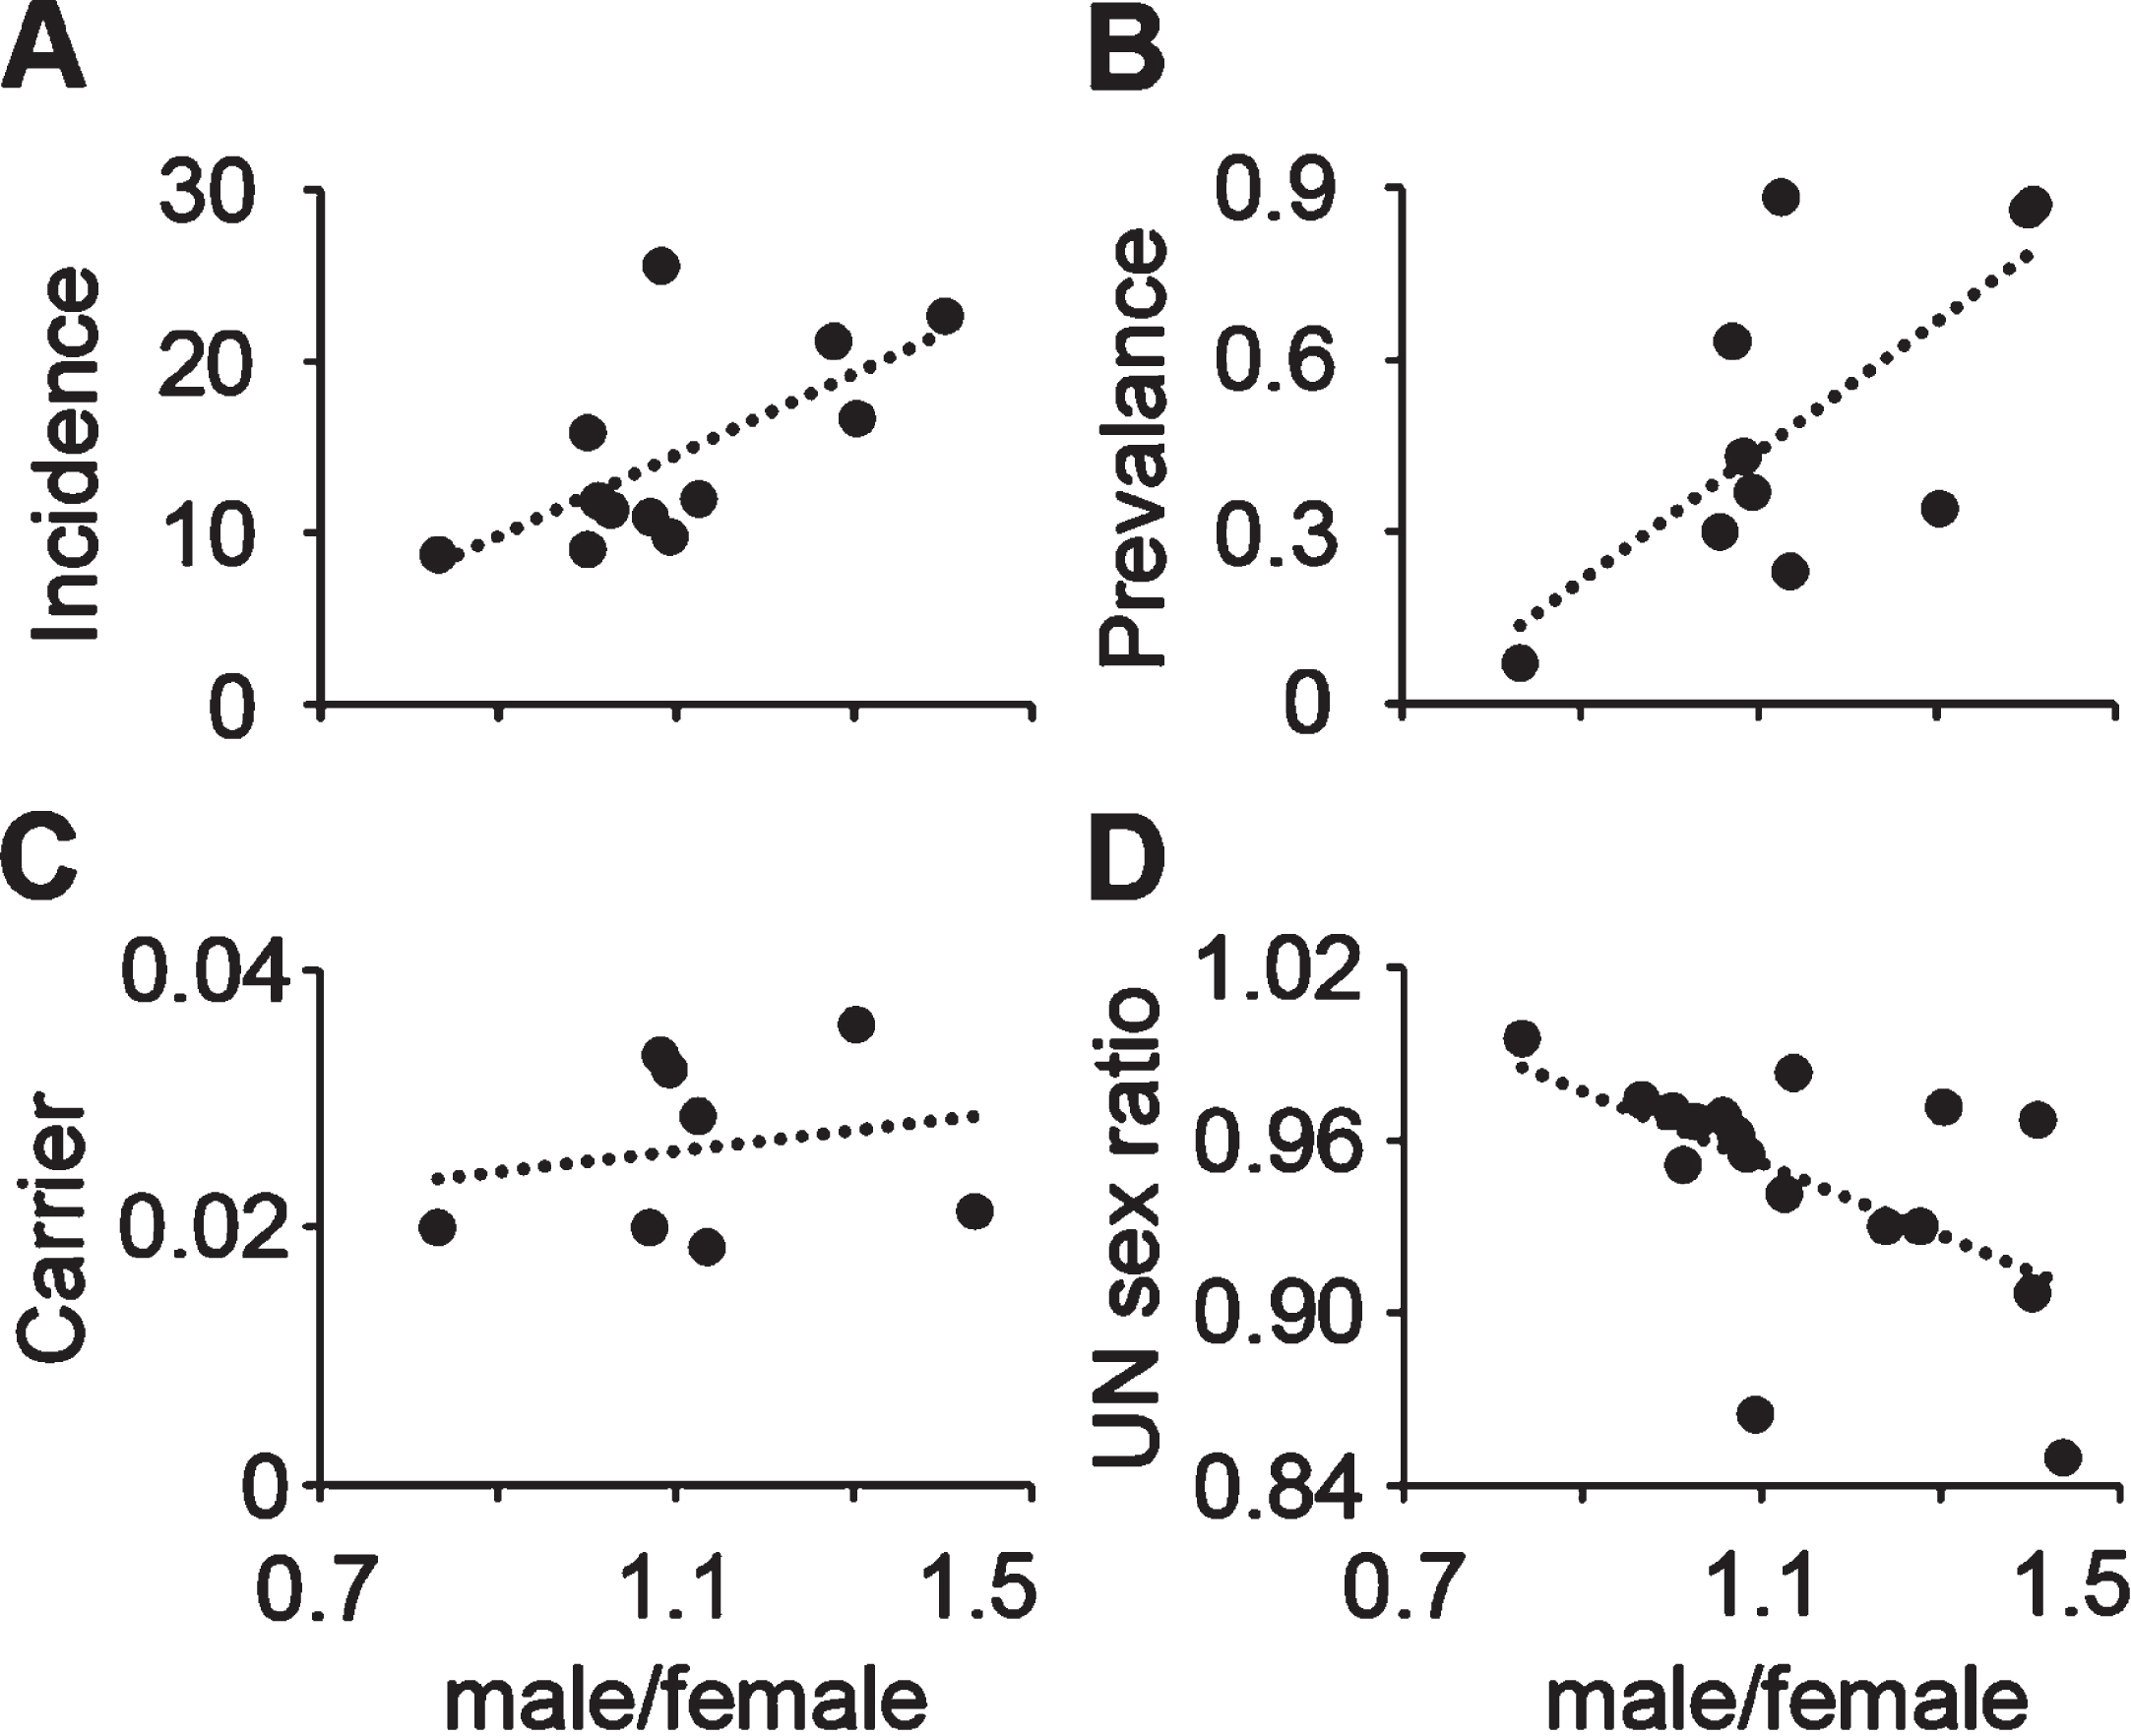 Male/female ratio of SMA patients correlates with incidence and prevalence ratio by country. A– D, male/female ratio plotted with (A) SMA incidence (n = 12, r = 0.67, P = 0.02 two-tailed), (B) SMA prevalence (n = 10, r = 0.68, P = 0.03 two-tailed), (C) SMA carrier frequency (n = 8, r = 0.27, P = 0.26 one-tailed), (D) the average male/female sex ratio of total population (1950– 2020) from United Nations Population Division (n = 17, r = – 0.54, P = 0.03 two-tailed).